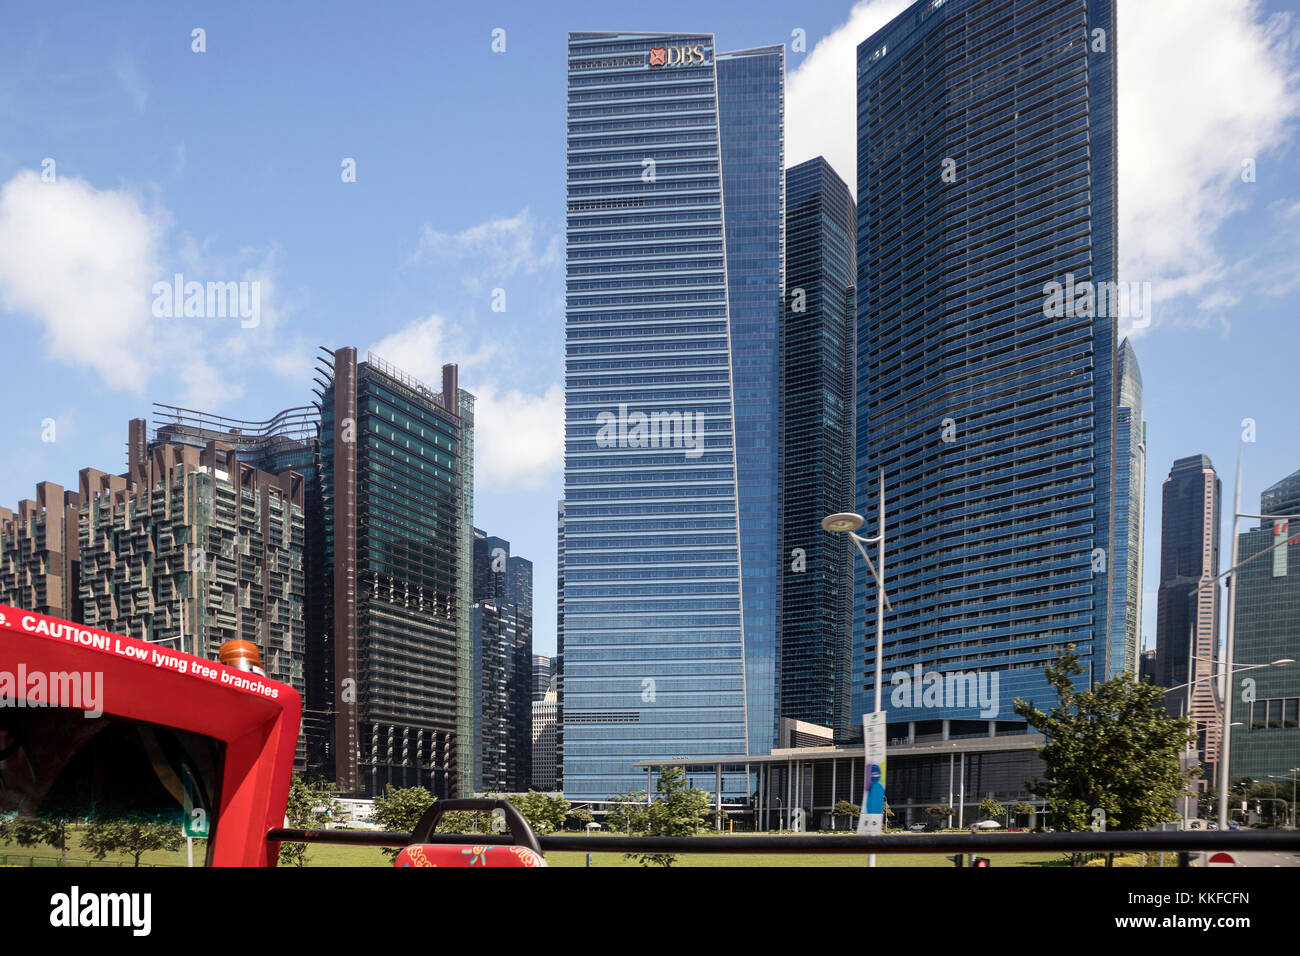 The skyline of modern Singapore photographed in July 2017 Stock Photo